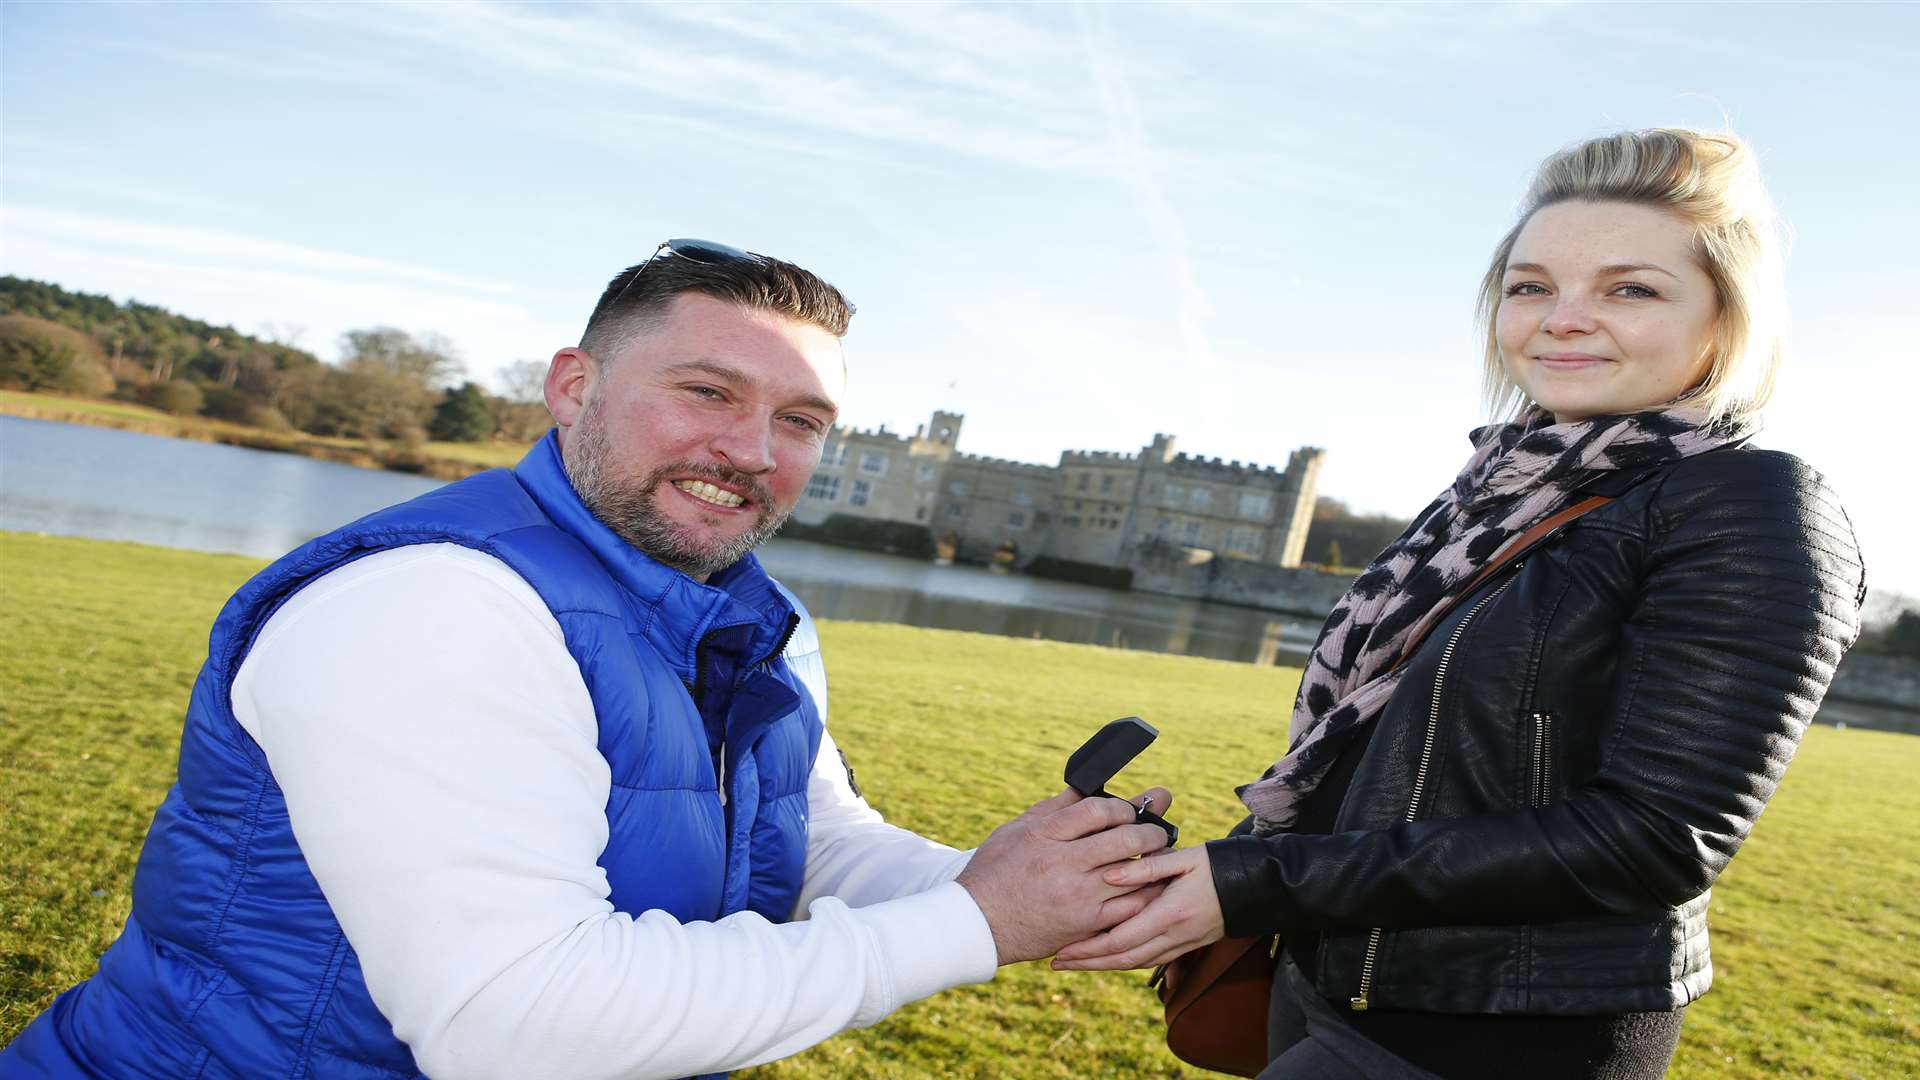 Laurence Elston proposed to girlfriend Sara Rae by arranging for a plane to fly over Leeds Castle. Picture: Andy Jones